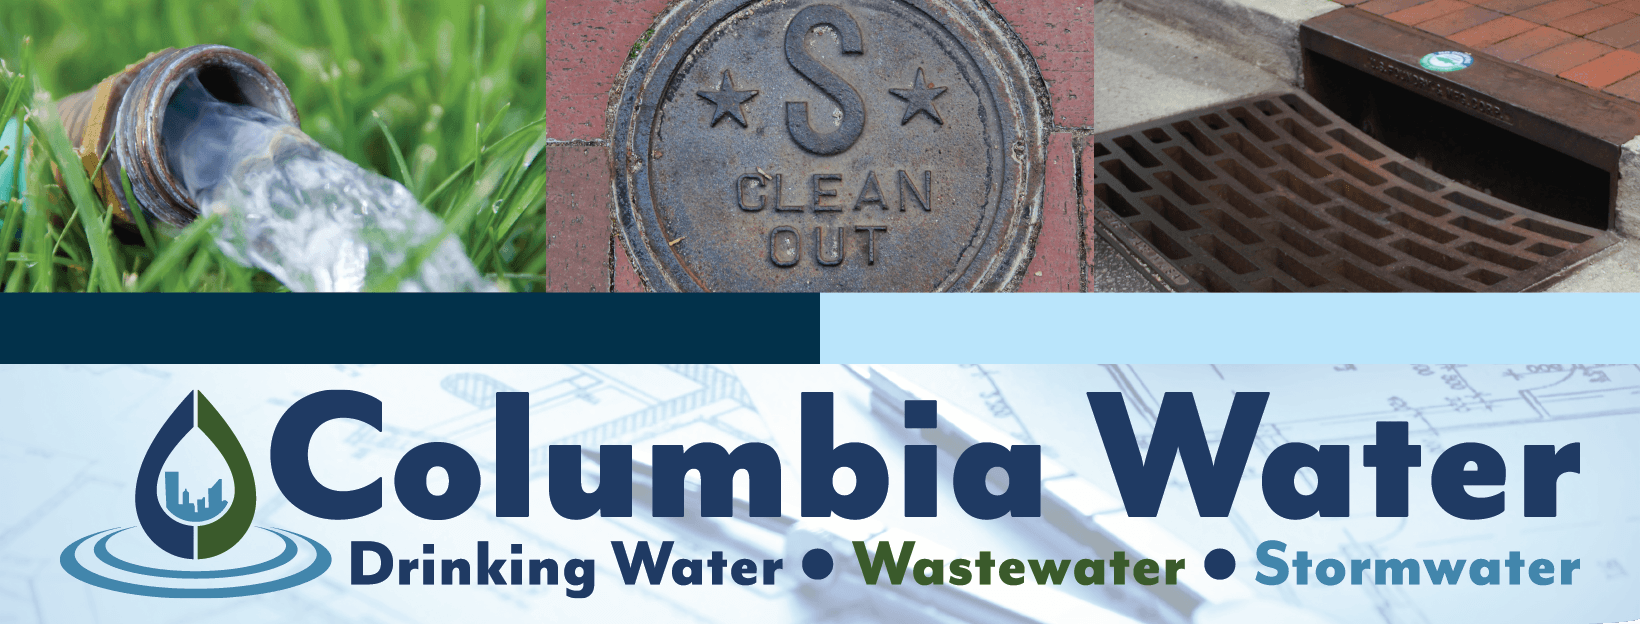 Columbia Pipe Logo - Welcome to the City of Columbia ::